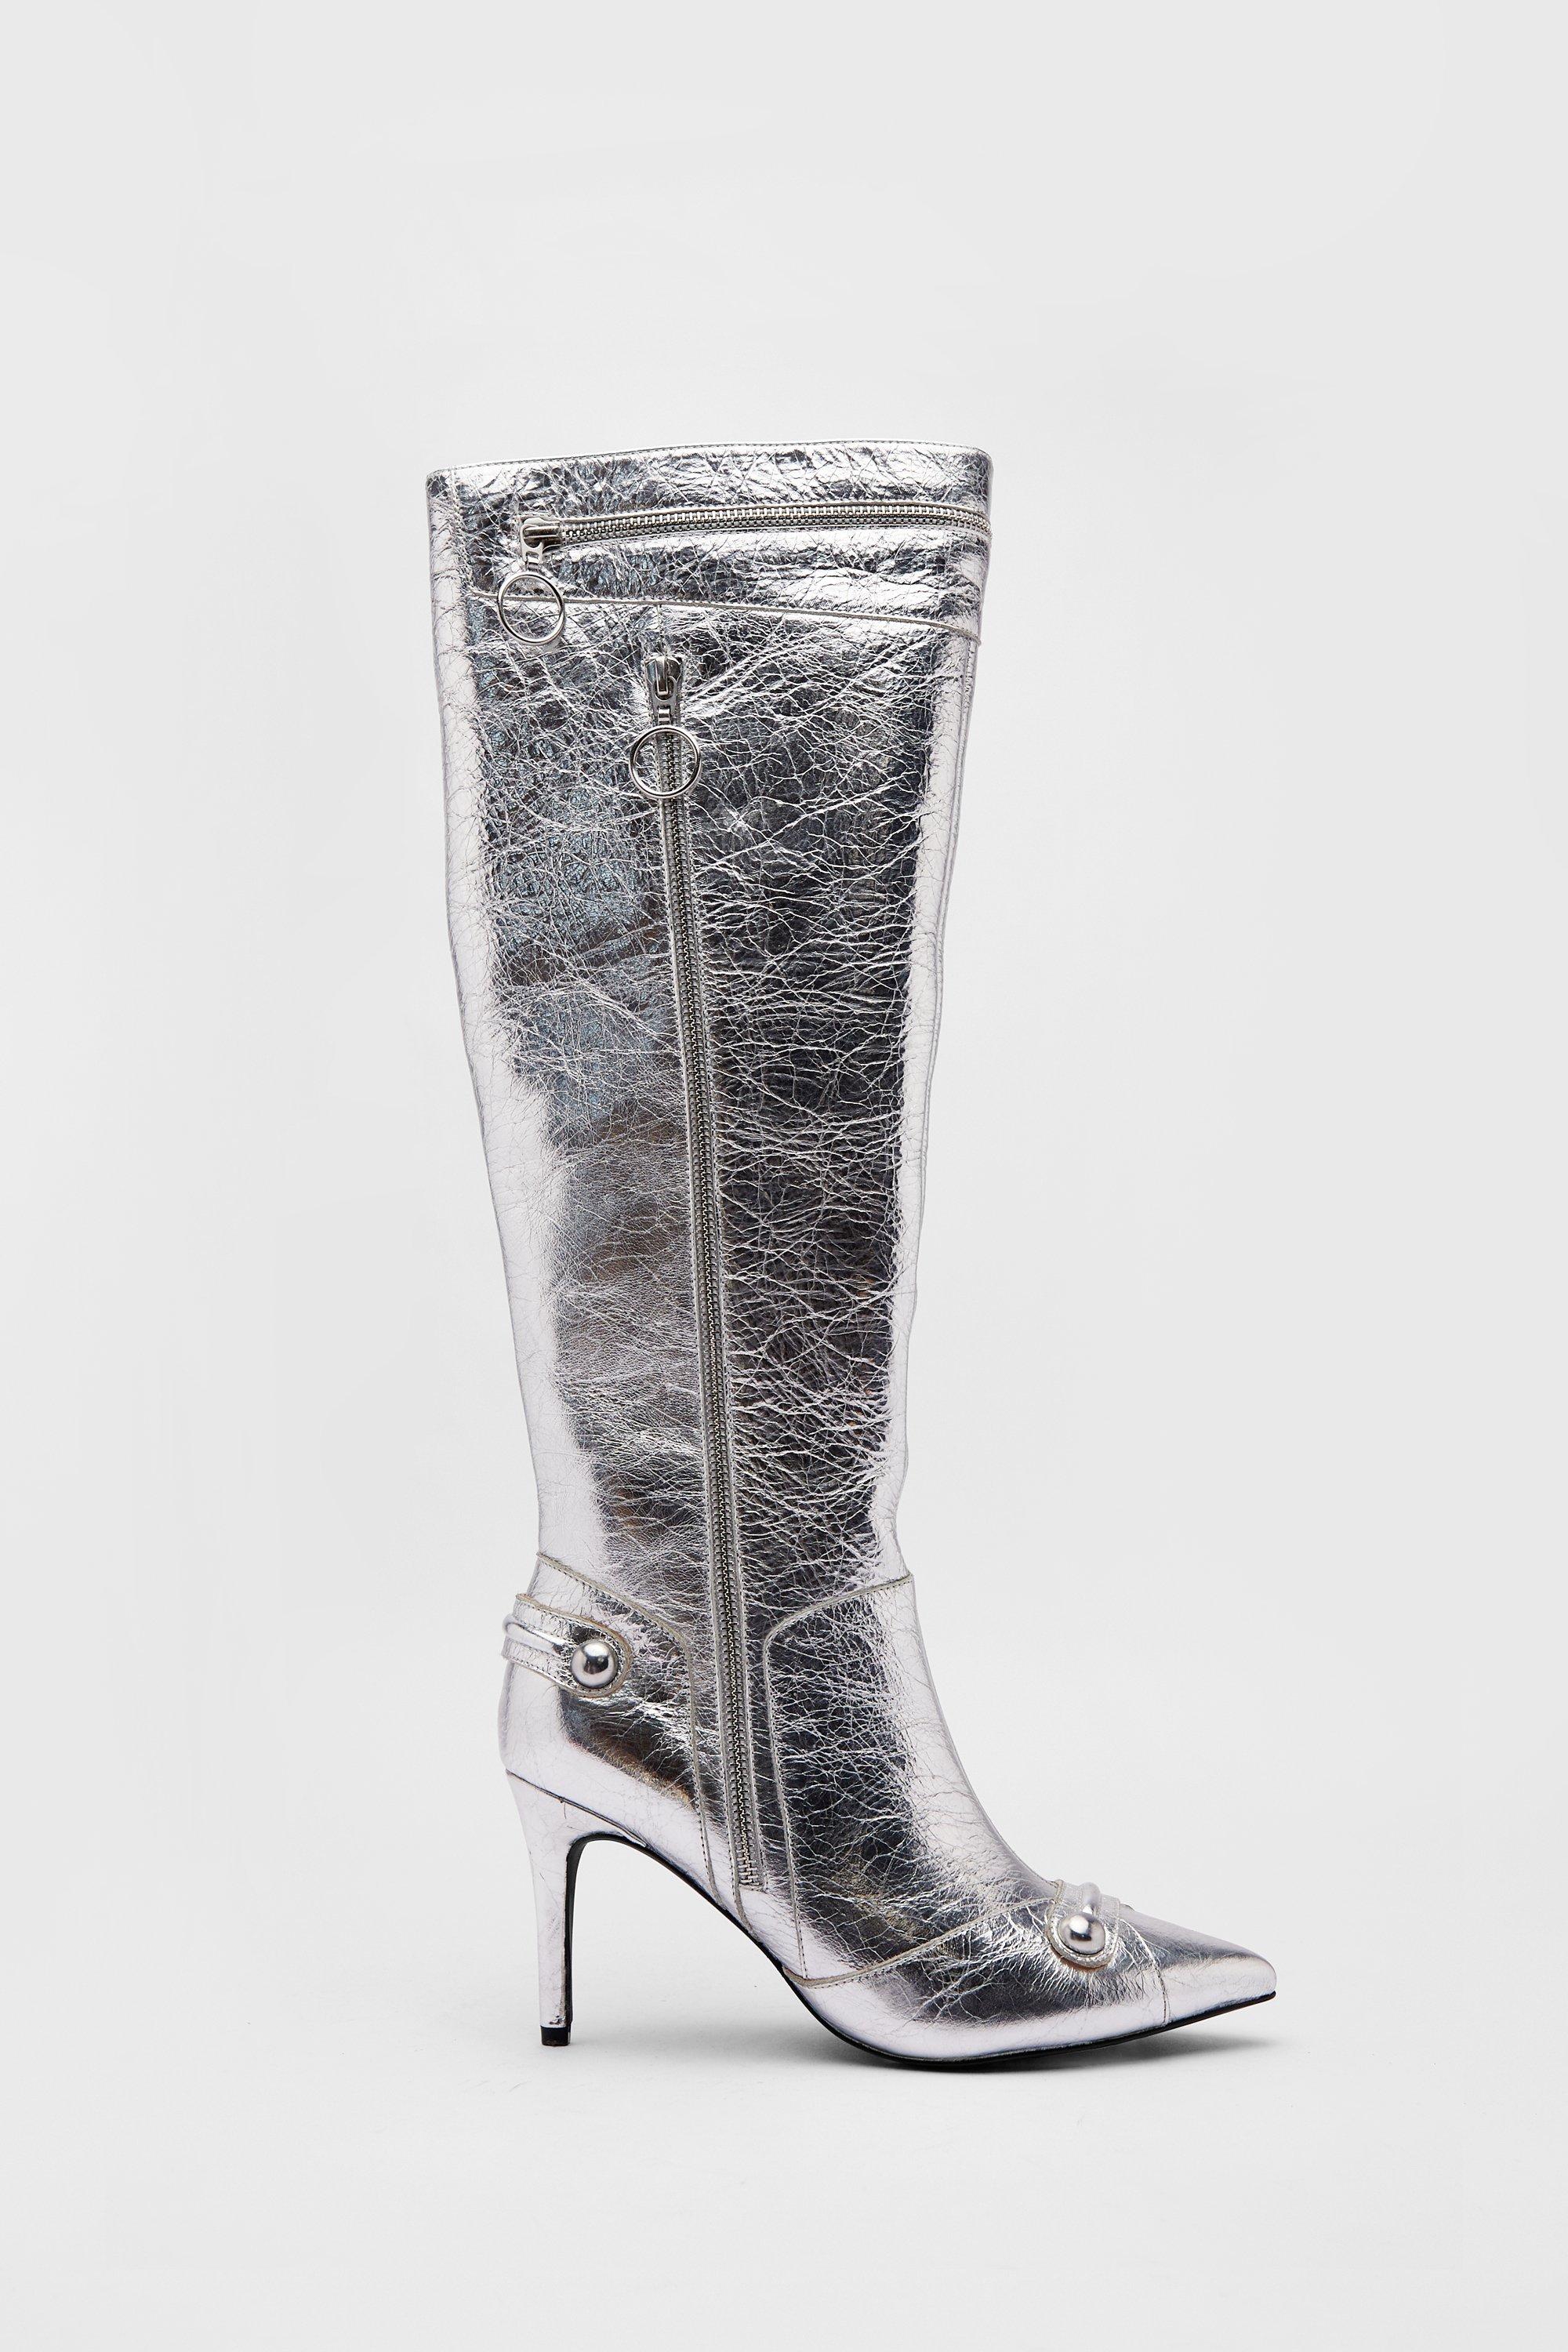 Womens Leather Metallic Zip & Stud Pointed Toe Knee High Boots - silver